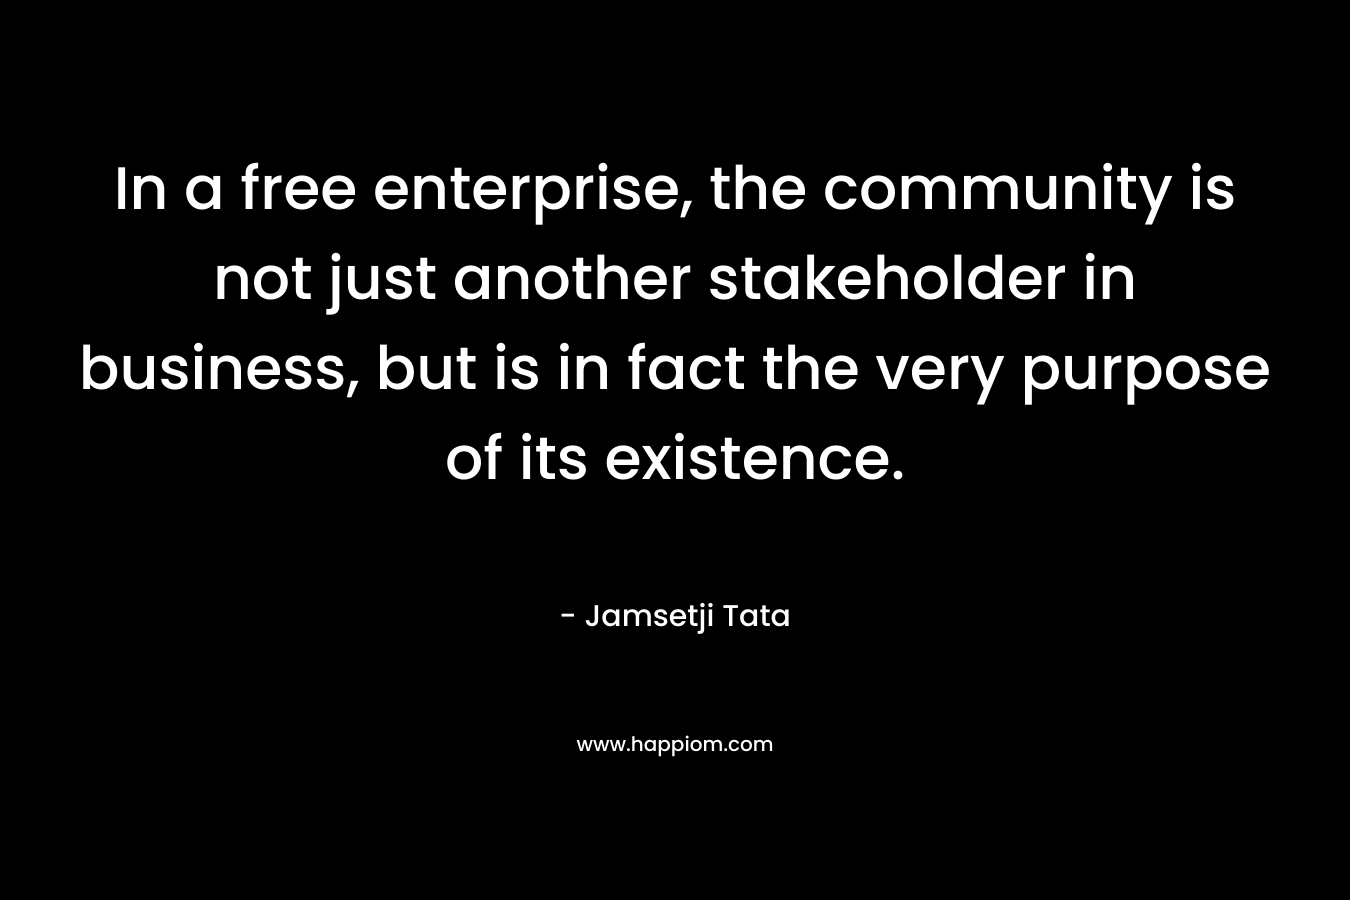 In a free enterprise, the community is not just another stakeholder in business, but is in fact the very purpose of its existence. – Jamsetji Tata